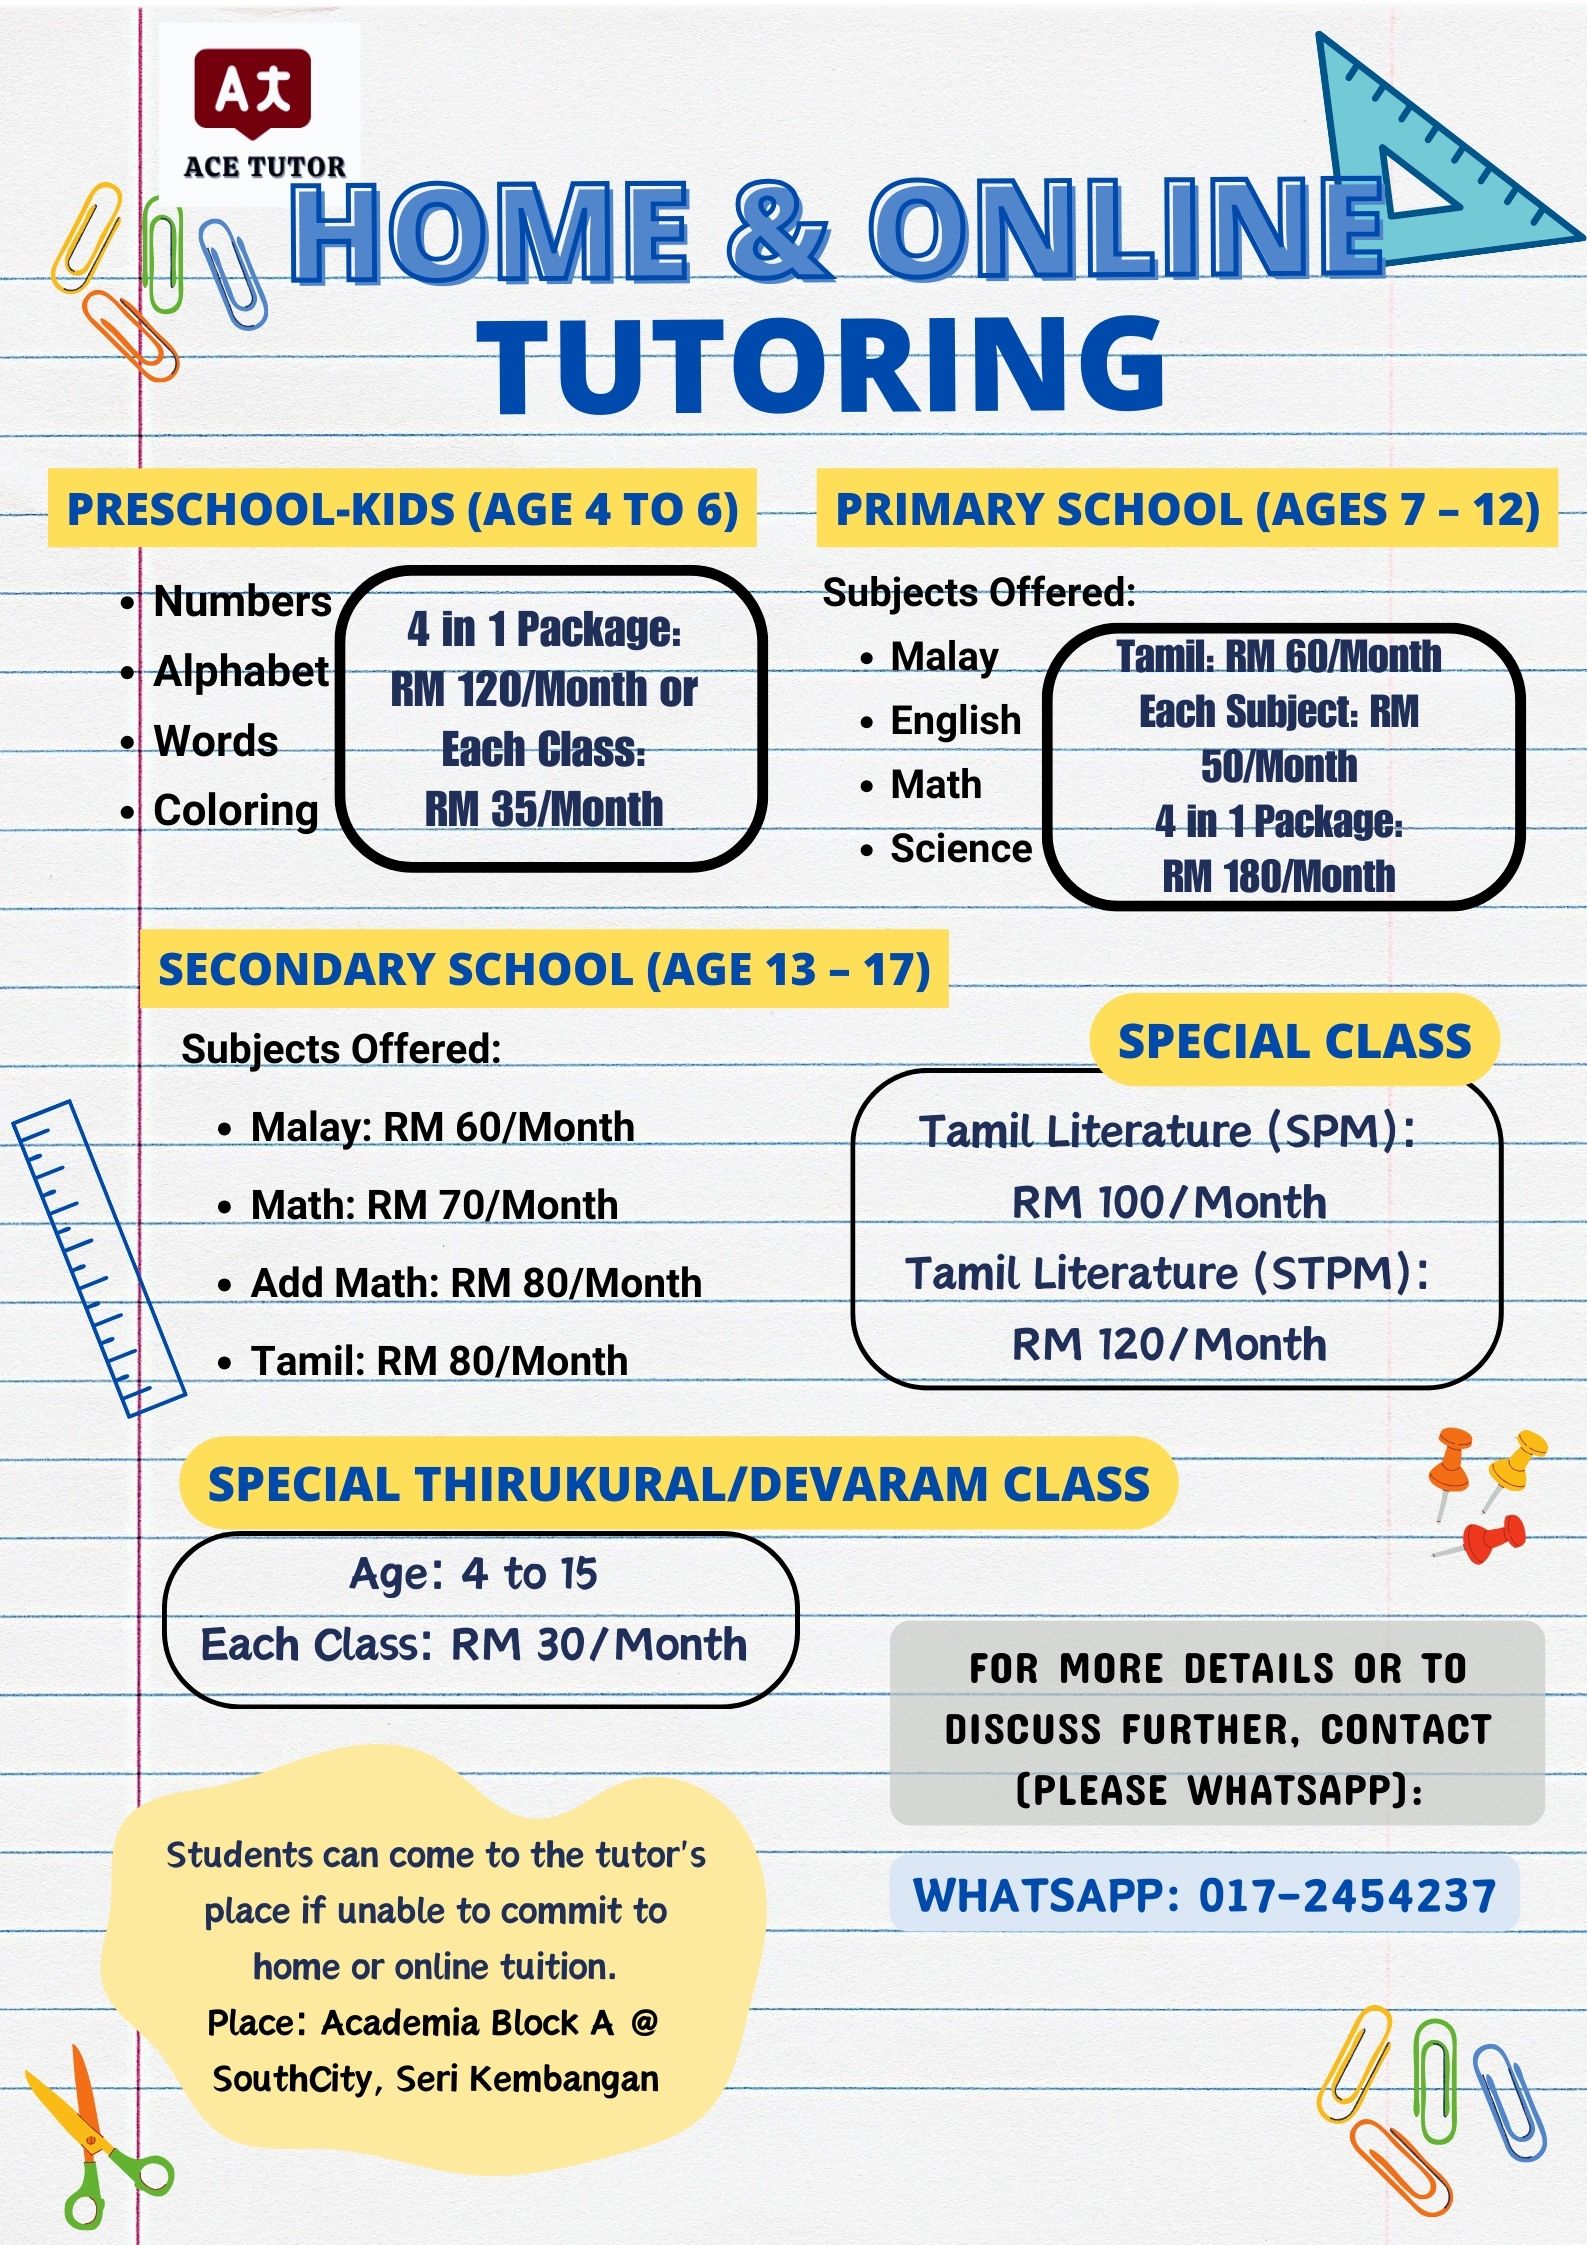 ACE TUTOR

HOME &amp; ONLINE.
~~ TUTORING

PRESCHOOL-KIDS (AGE4 TO 6) - PRIMARY SCHOOL (AGES 7 - 12) -

 

—s Numbers; —N\ Subjects Offered: —

~ 4in1Package:
Alphabet] gy 120/Month or : es Eiri Til

o Words — gen : geet
ach Class: Sain 50/Month

«| Coloring RM 35/Month 4 in 1 Package:

RM 180/Month

    

  
 
 
   
  
  
   

« Science

| SECONDARY SCHOOL (AGE 13-17) Shea Si
Subjects Offered: ~~ SPECIAL CLASS

« Malay: RM 60/Month Tamil Literature (SPM):

« Math: RM 70/Month era] e a RM 100/Month
_« Add Math: RM 80/Month | Tamil Literature (STPM): |

 

e Tamil: RM 80/Month RM 120/Month

SPECIAL THIRUKURAL/DEVARAM CLASS 3 =

Age: 4 to 15
Each Class: RM 30/Month

   

FOR MORE DETAILS OR TO
DISCUSS FURTHER, CONTACT
(PLEASE WHATSAPP):

   

Students can come to the tutor's Sm - — a
place if unable to commit to = WHATSAPP: 017-2454237 :

home or online tuition.
Place: Academia Block A @

_ SouthCity, Seri Kembangan SE re RoR dU

\
4